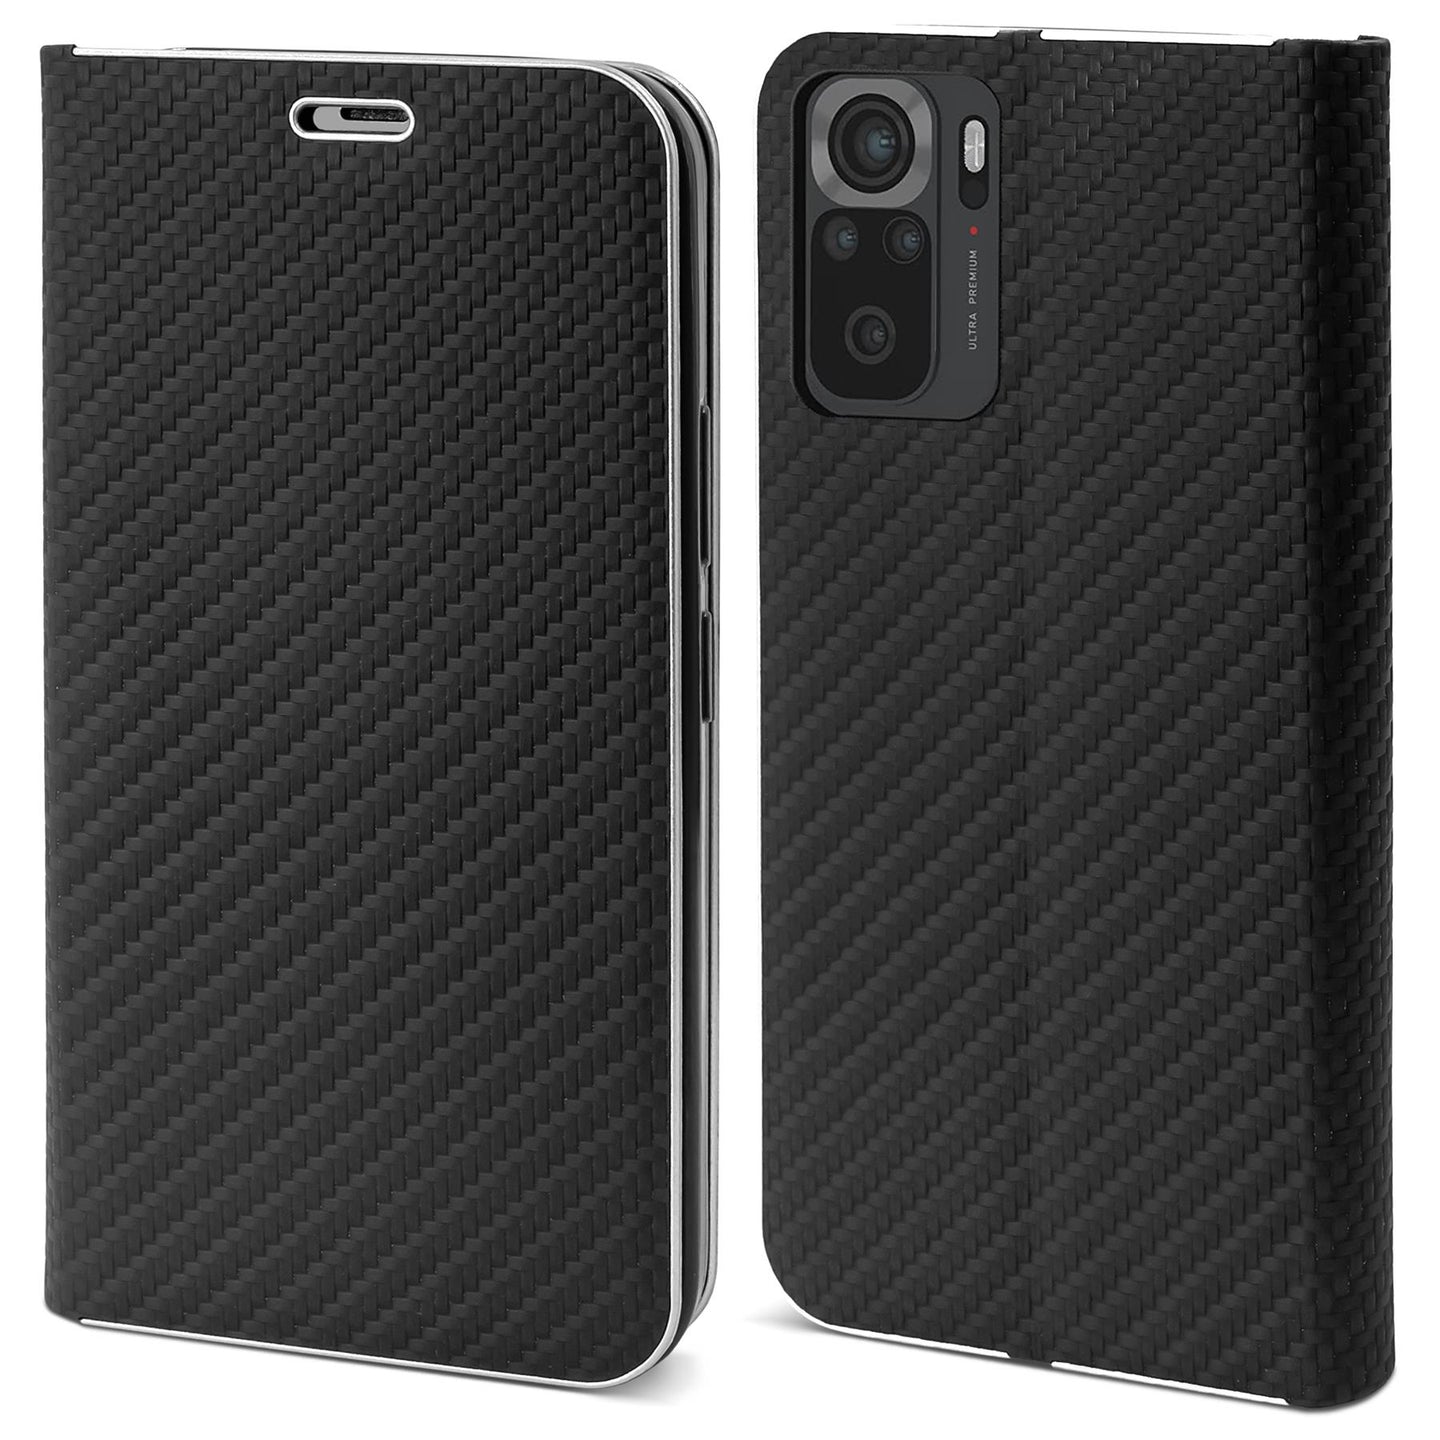 Moozy Wallet Case for Xiaomi Redmi Note 10 / Note 10S, Black Carbon - Flip Case with Metallic Border Design Magnetic Closure Flip Cover with Card Holder and Kickstand Function